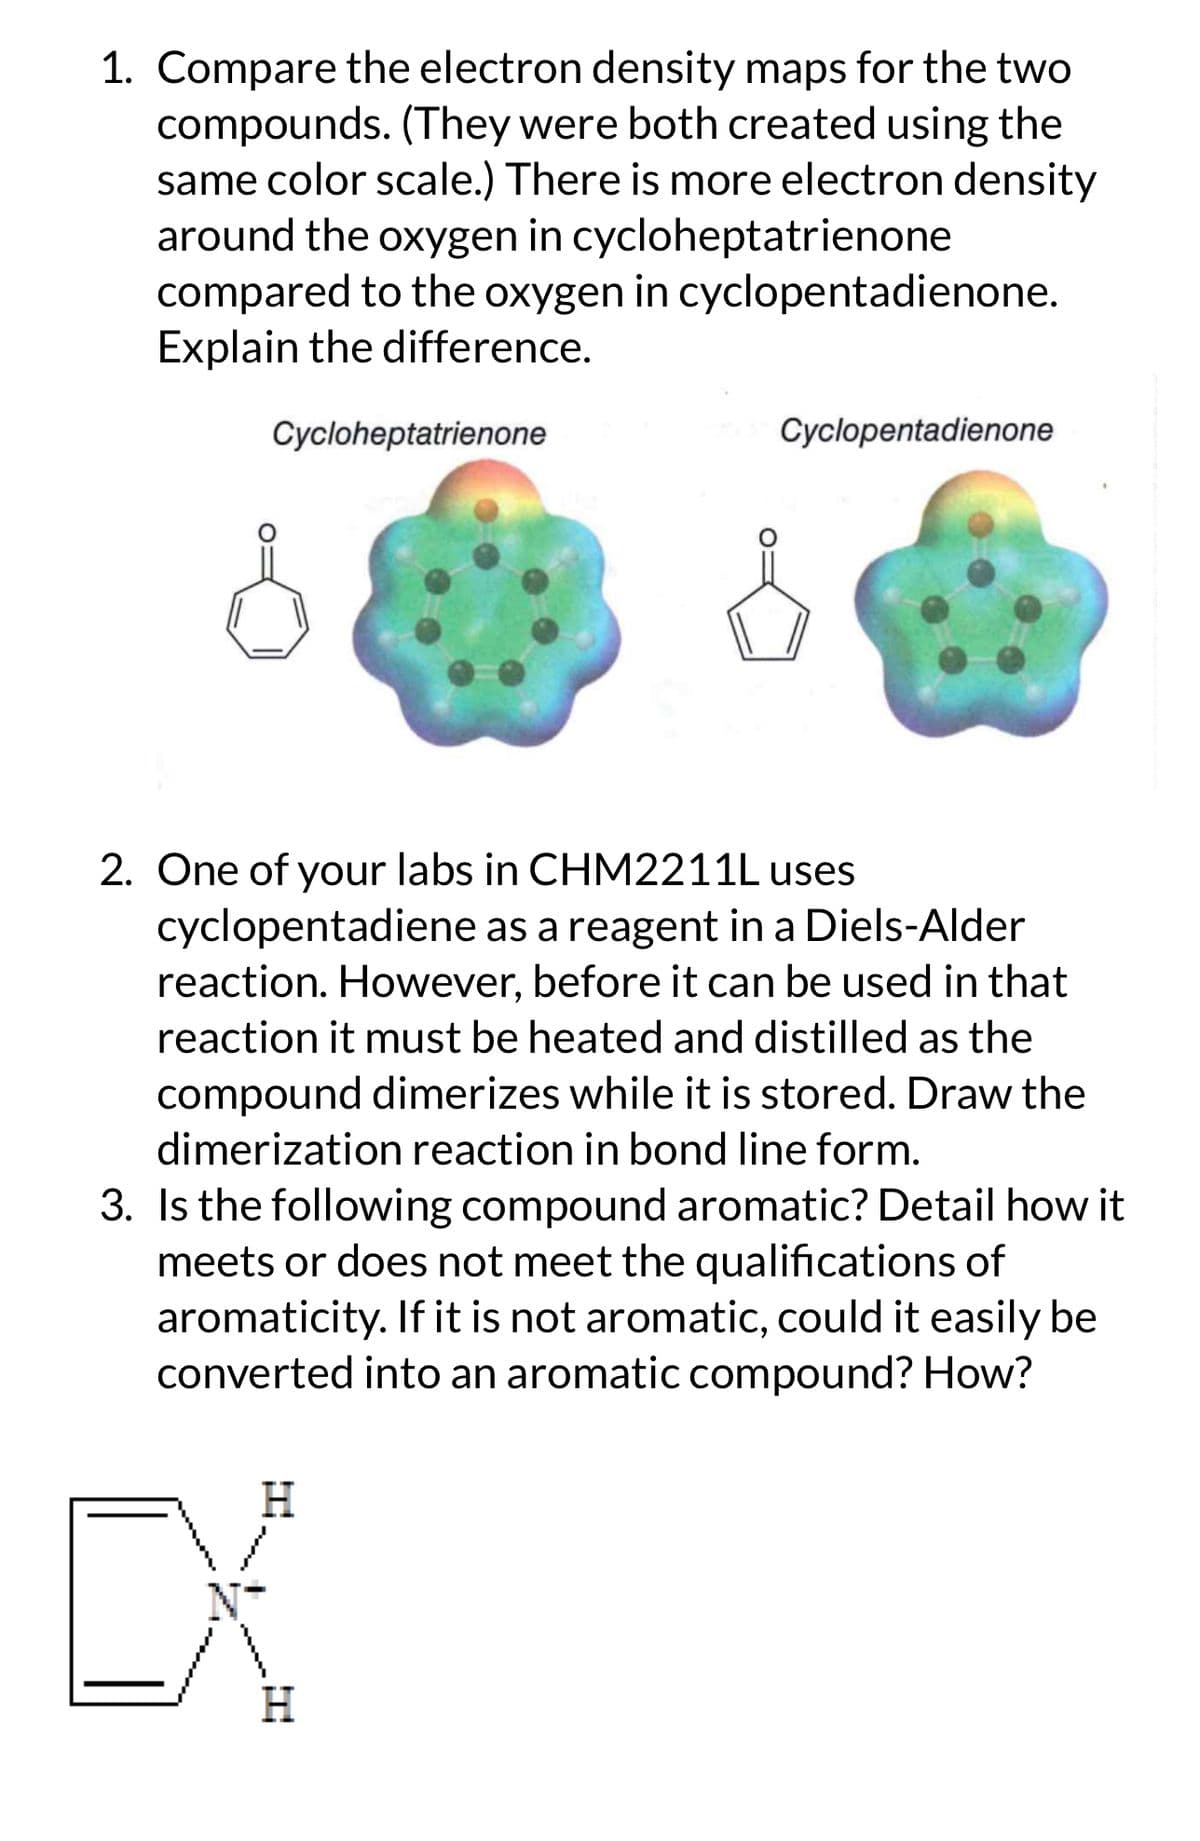 1. Compare the electron density maps for the two
compounds. (They were both created using the
same color scale.) There is more electron density
around the oxygen in cycloheptatrienone
compared to the oxygen in cyclopentadienone.
Explain the difference.
Cycloheptatrienone
Cyclopentadienone
2. One of your labs in CHM2211L uses
cyclopentadiene as a reagent in a Diels-Alder
reaction. However, before it can be used in that
reaction it must be heated and distilled as the
compound dimerizes while it is stored. Draw the
dimerization reaction in bond line form.
3. Is the following compound aromatic? Detail how it
meets or does not meet the qualifications of
aromaticity. If it is not aromatic, could it easily be
converted into an aromatic compound? How?
H
CX
H